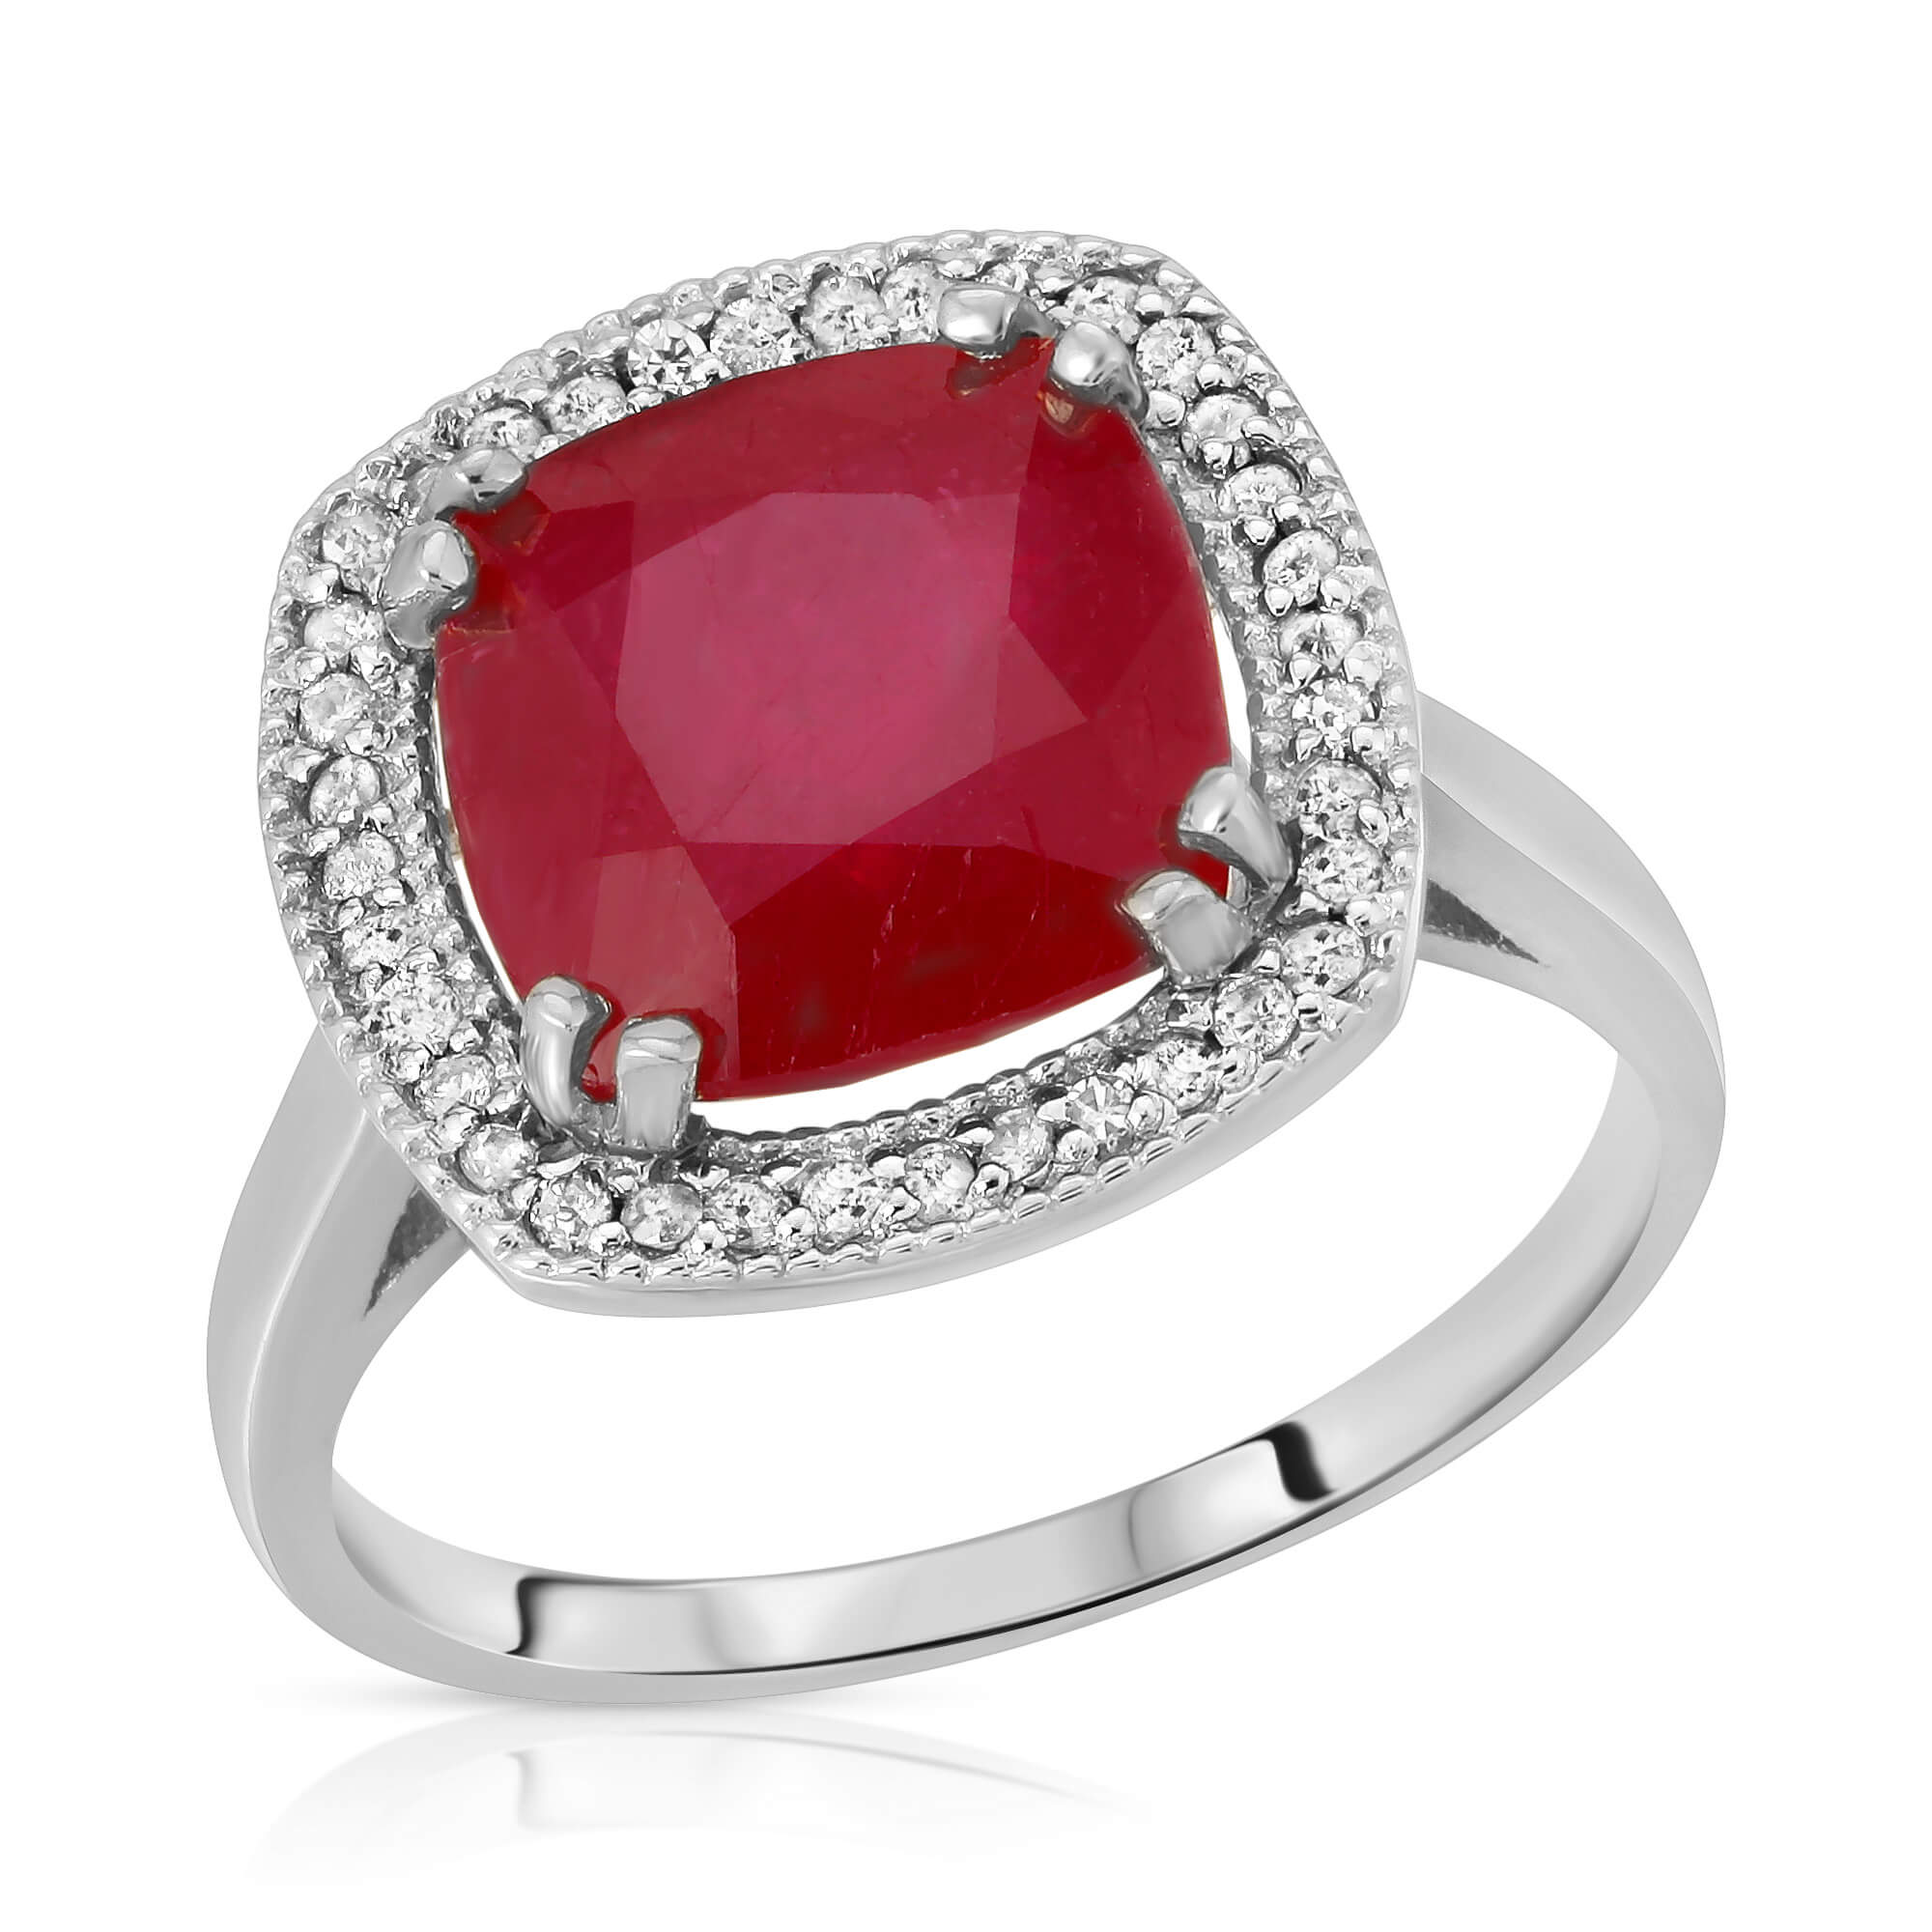 Cushion Cut Ruby Ring 6.9 ctw in 18ct White Gold